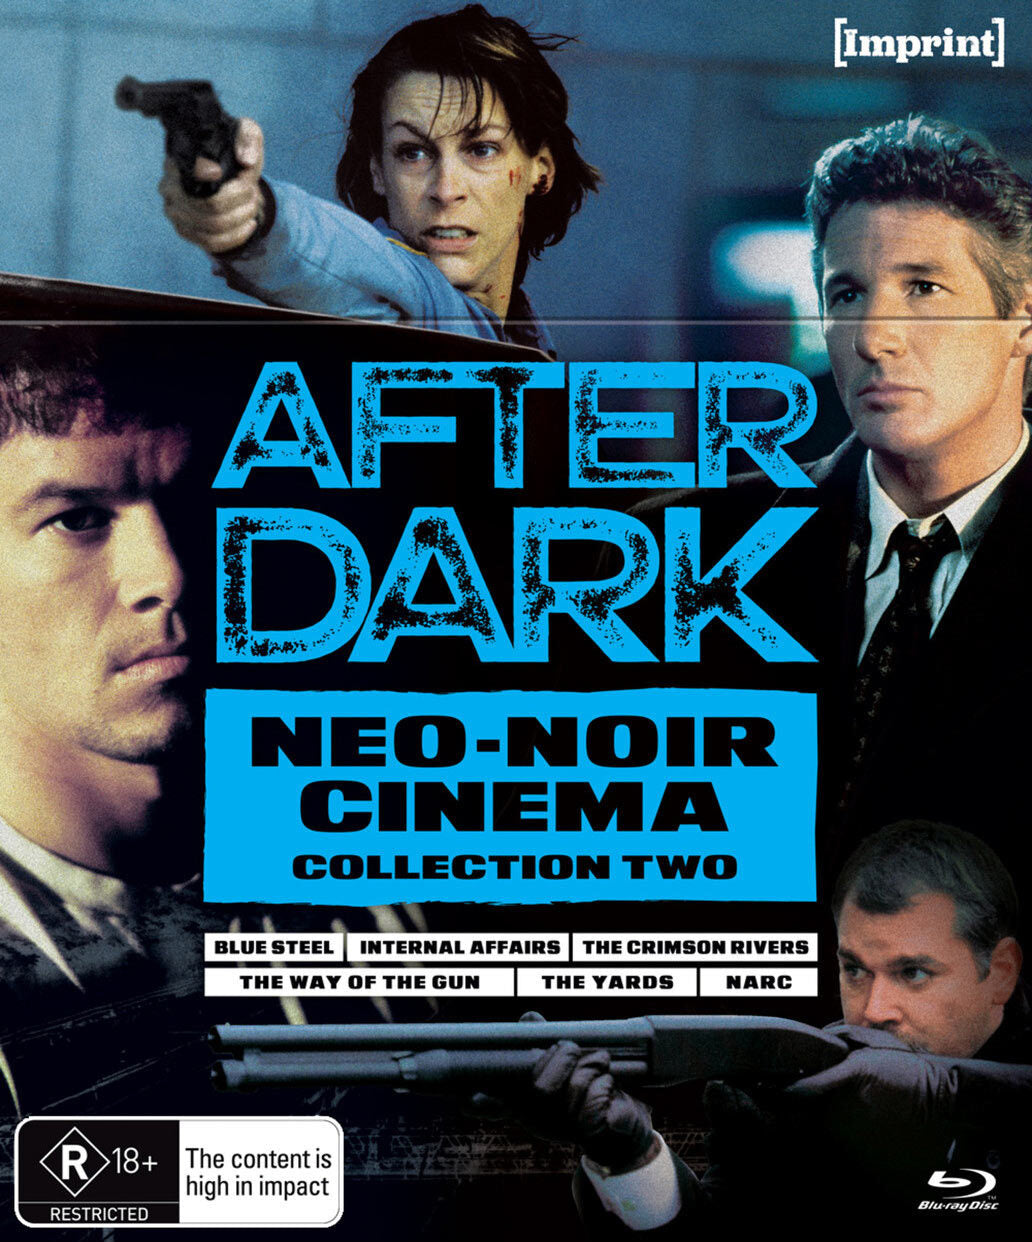 AFTER DARK: NEO NOIR CINEMA COLLECTION VOLUME TWO (REGION FREE IMPORT - LIMITED EDITION) BLU-RAY [SCRATCH AND DENT]